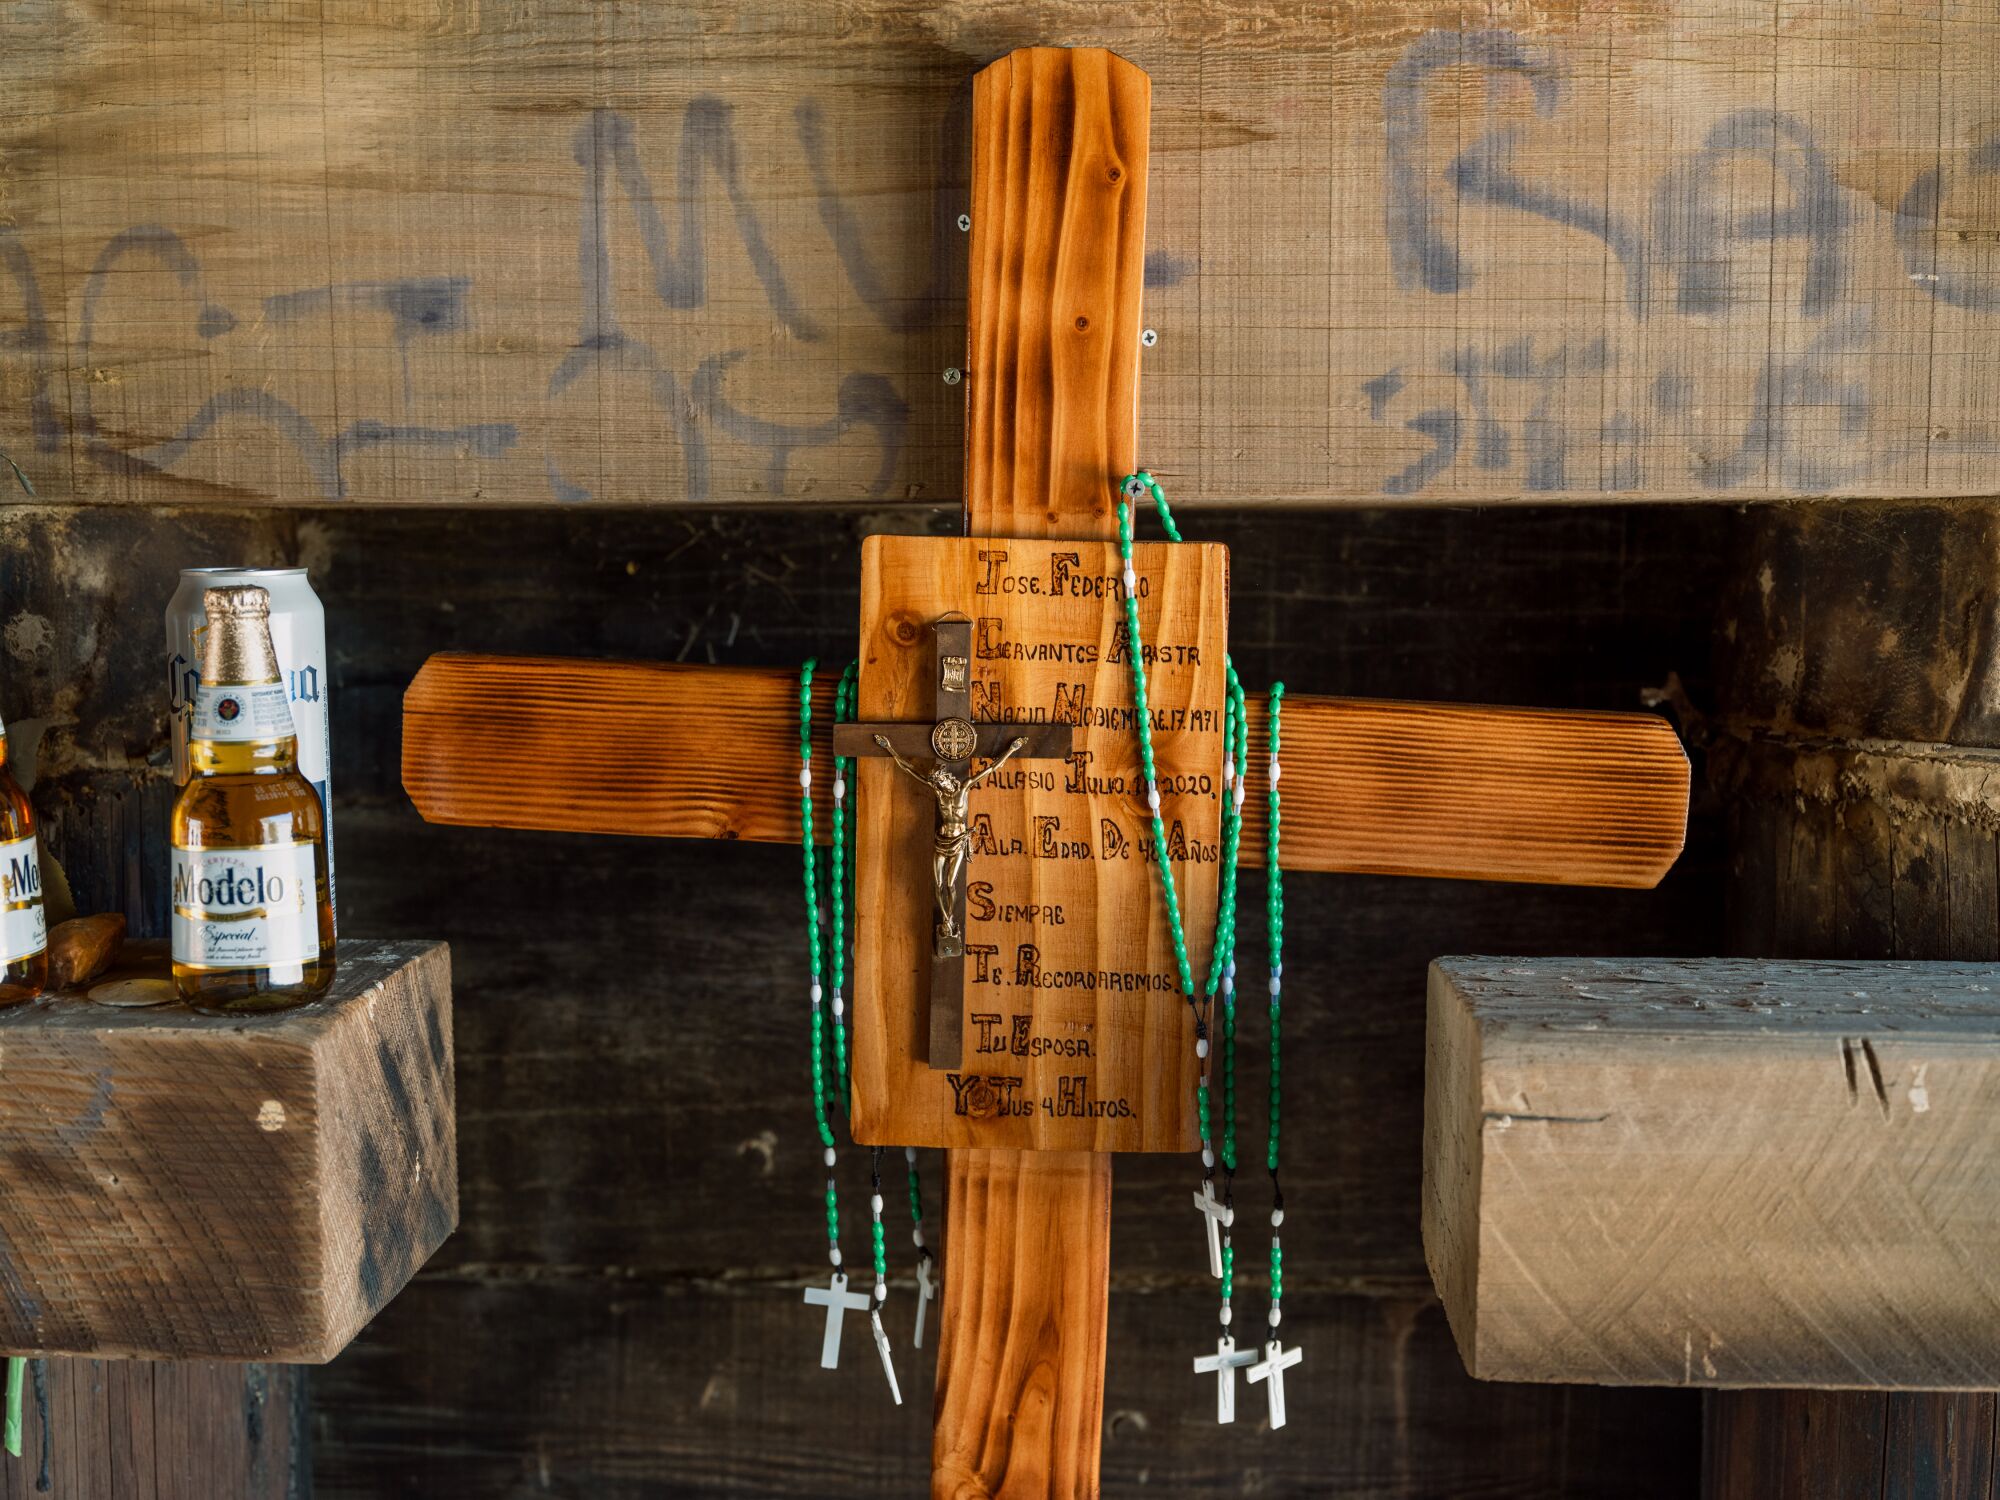 A horizontal frame of a wooden cross with another crucifix attached to its center and several rosary beads hanging on sides